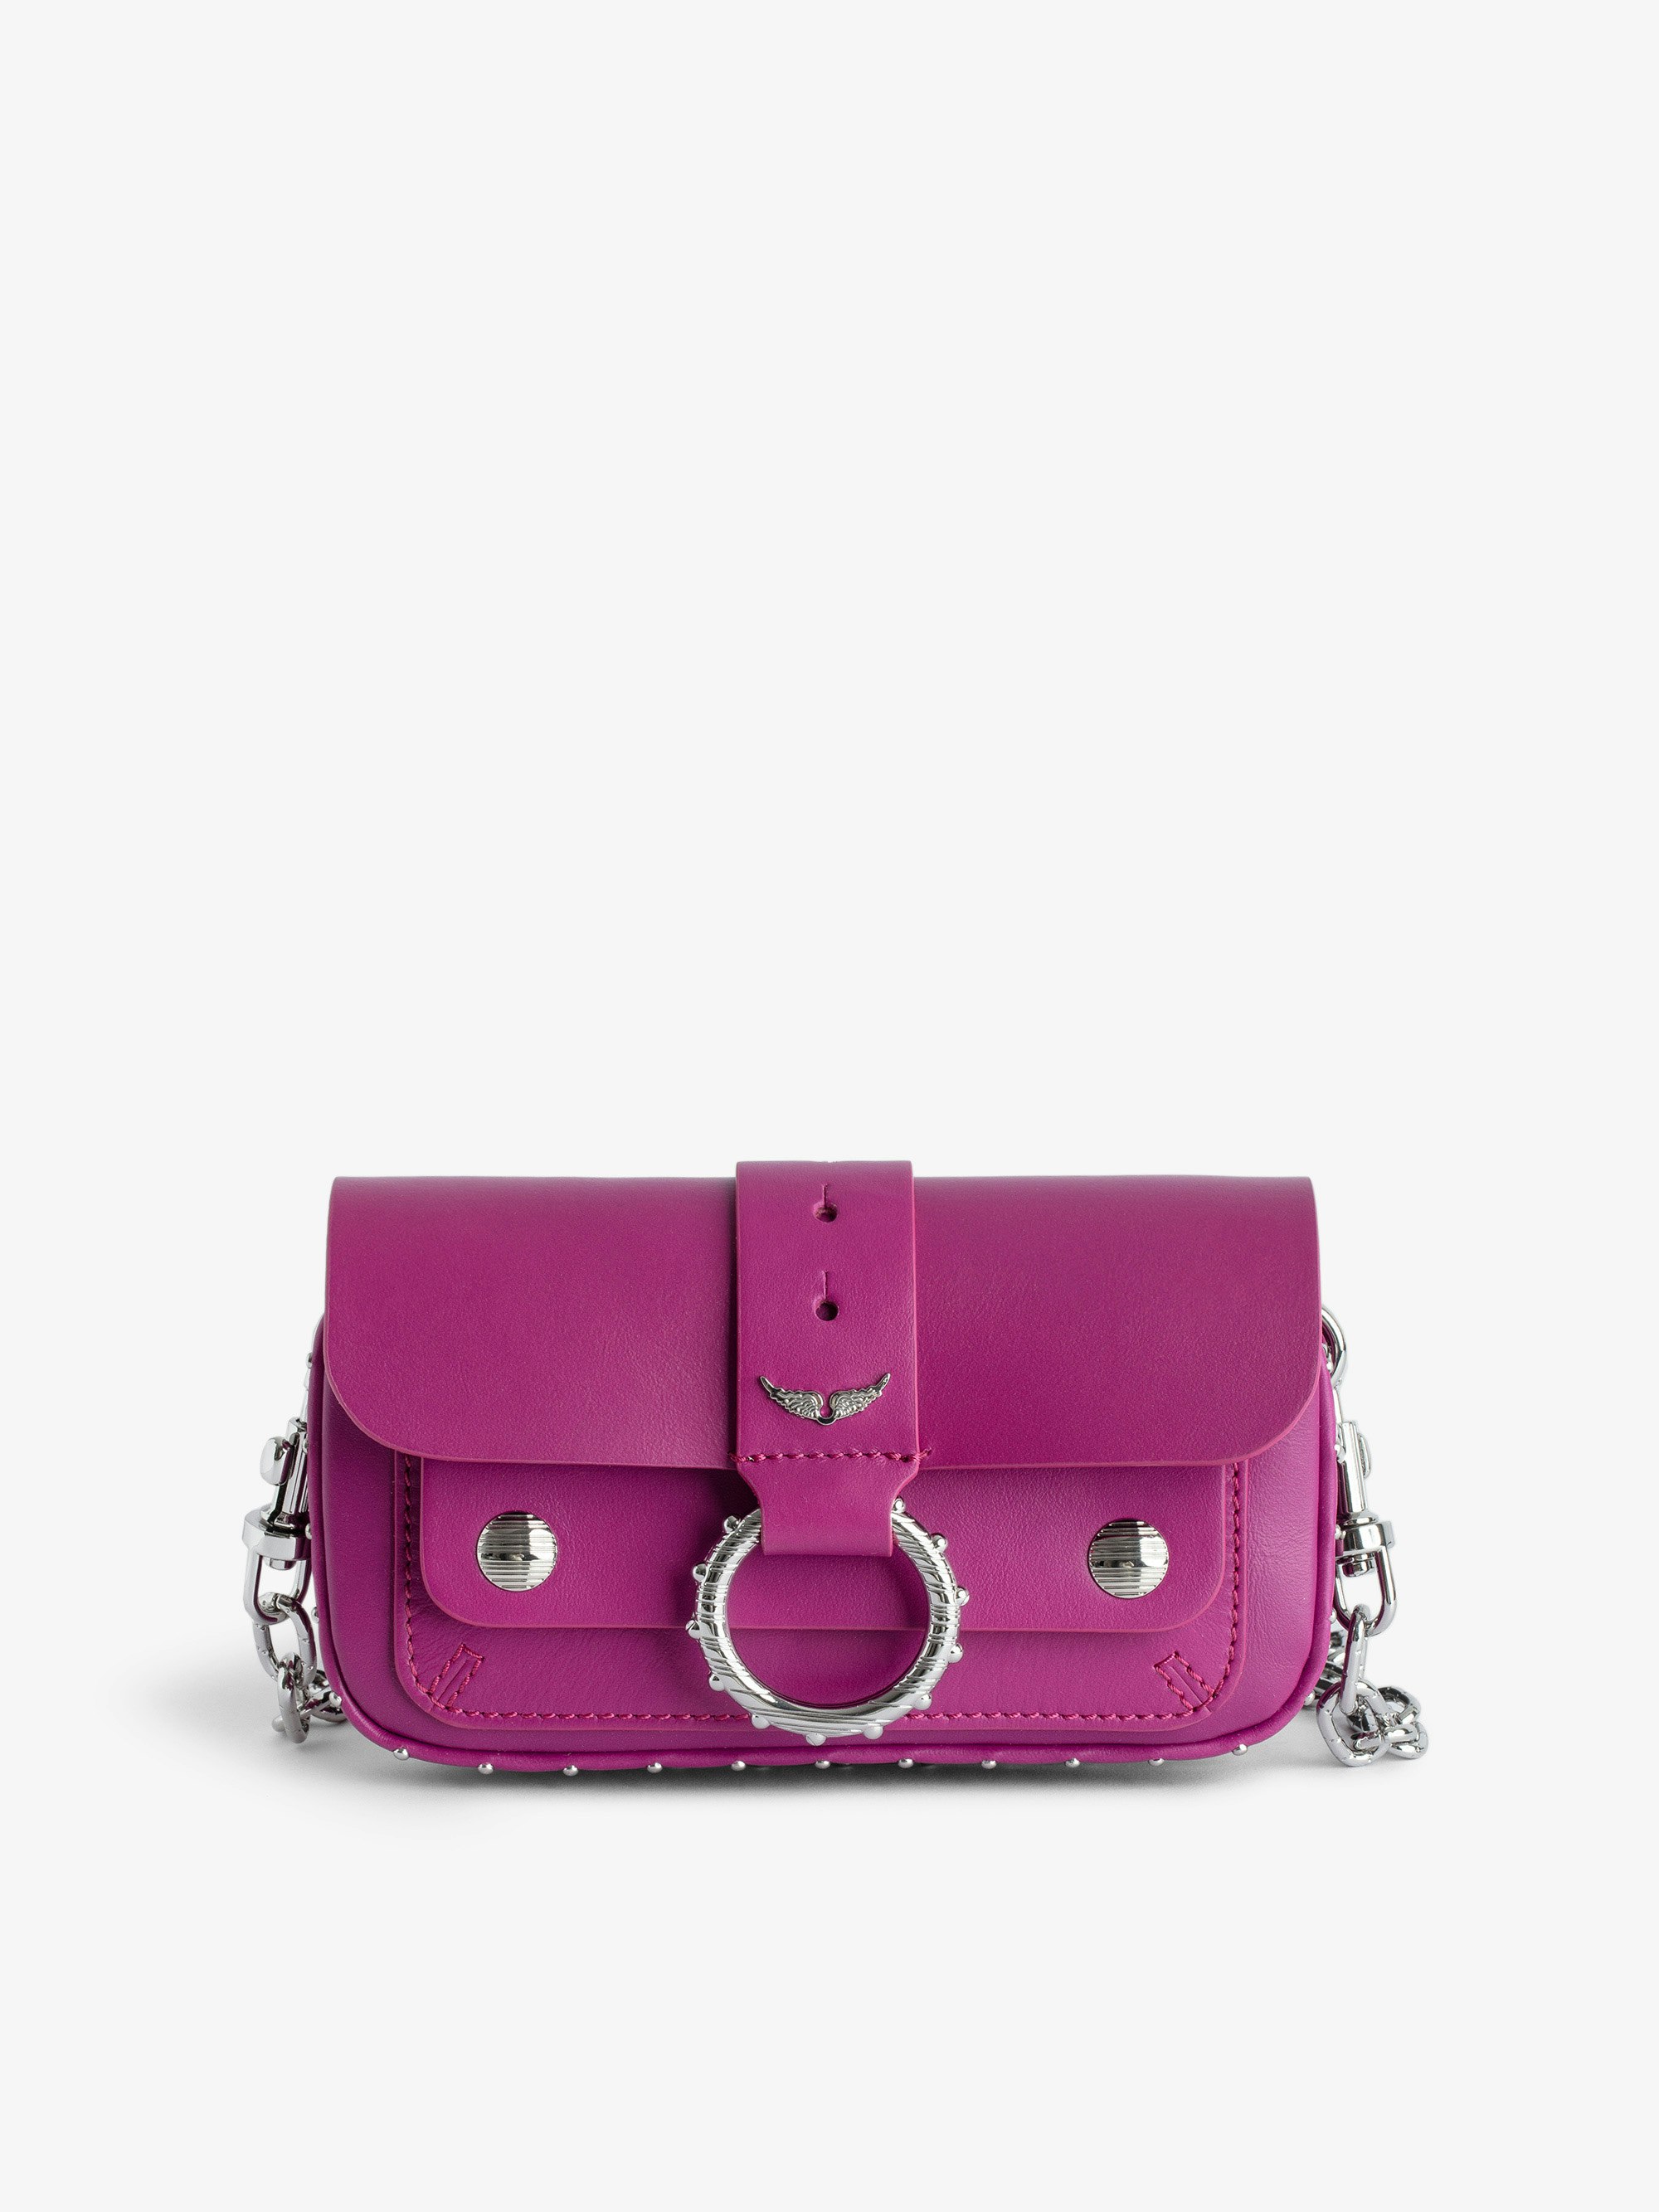 Kate Wallet Bag - Fuschia smooth leather mini bag with ring and metal chain.